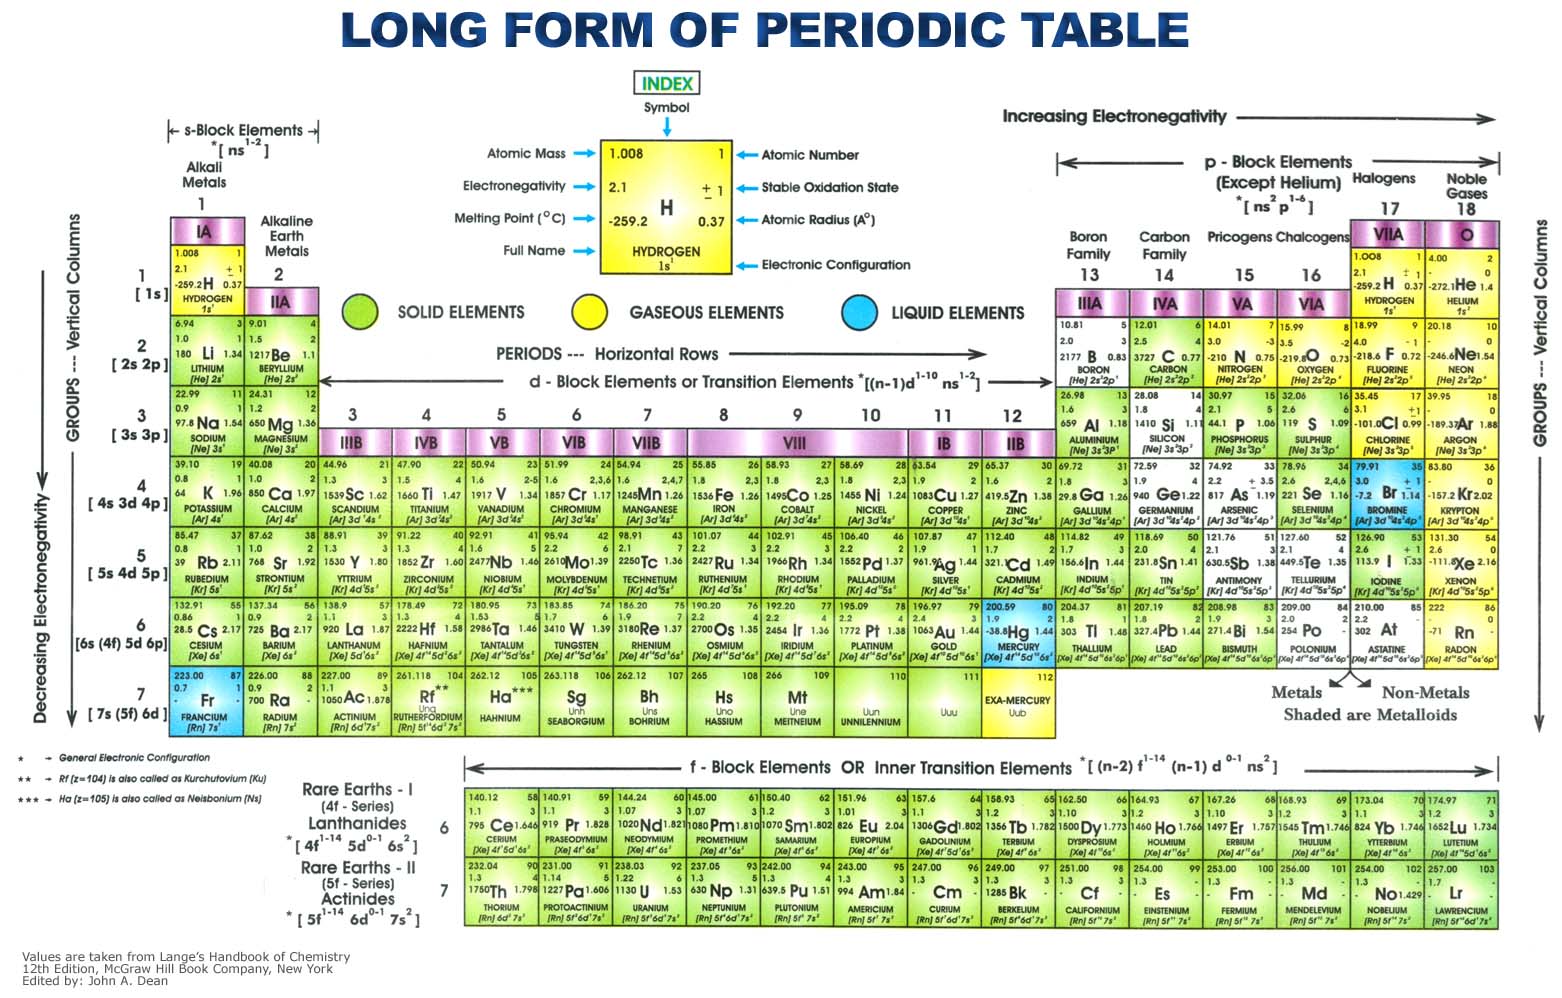 WALLPAPER IMAGE OF PERIODIC TABLE